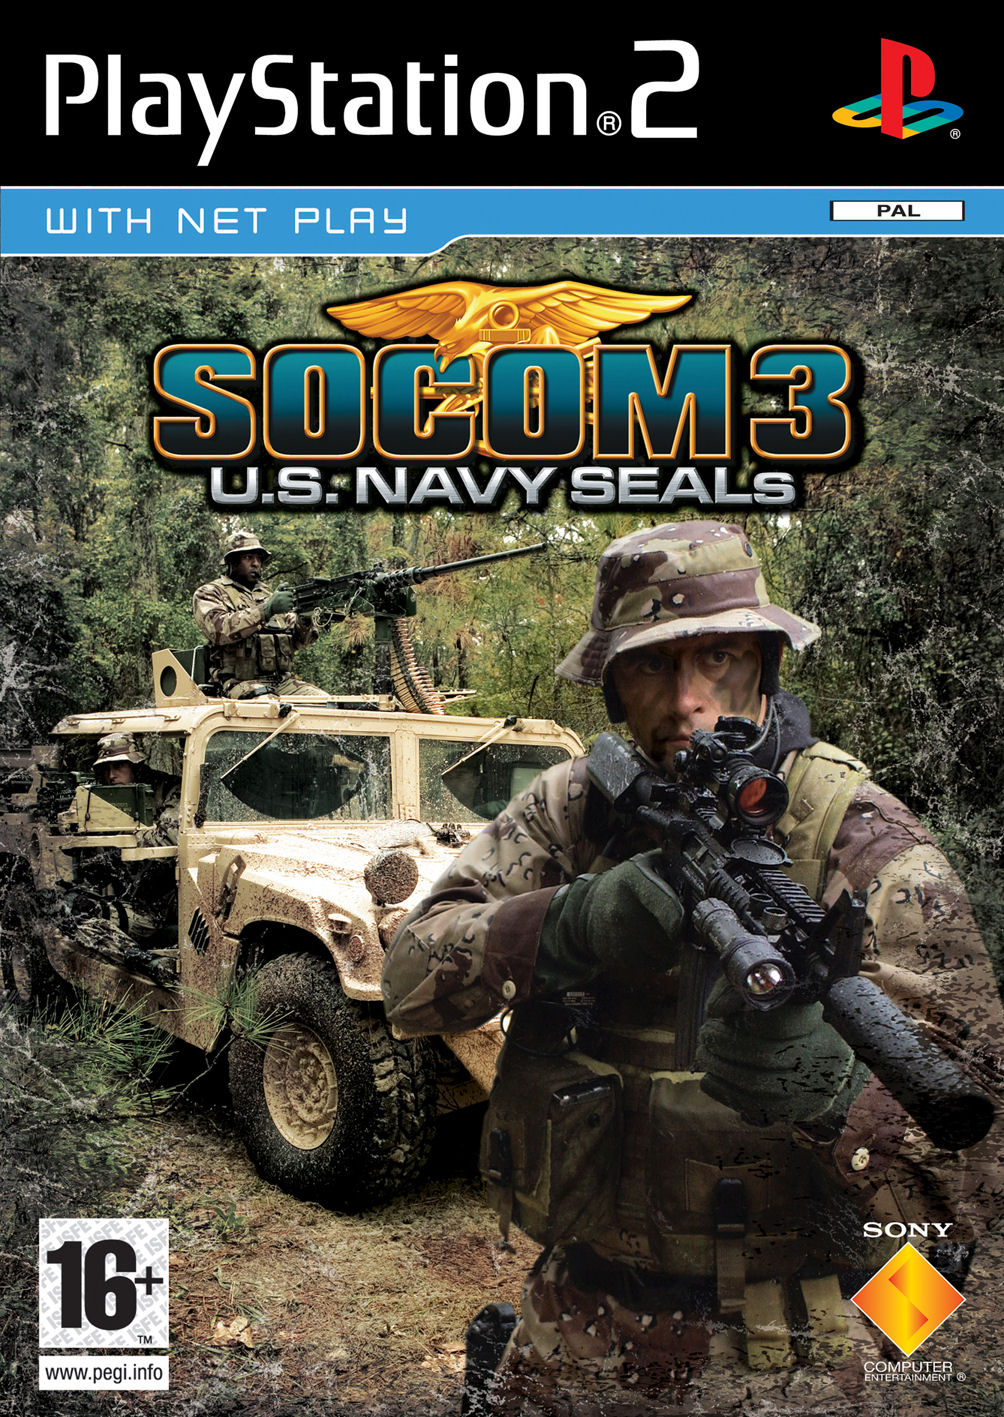 How to play SOCCOM US NAVY Fireteam Bravo Multiplayer in PPSSPP